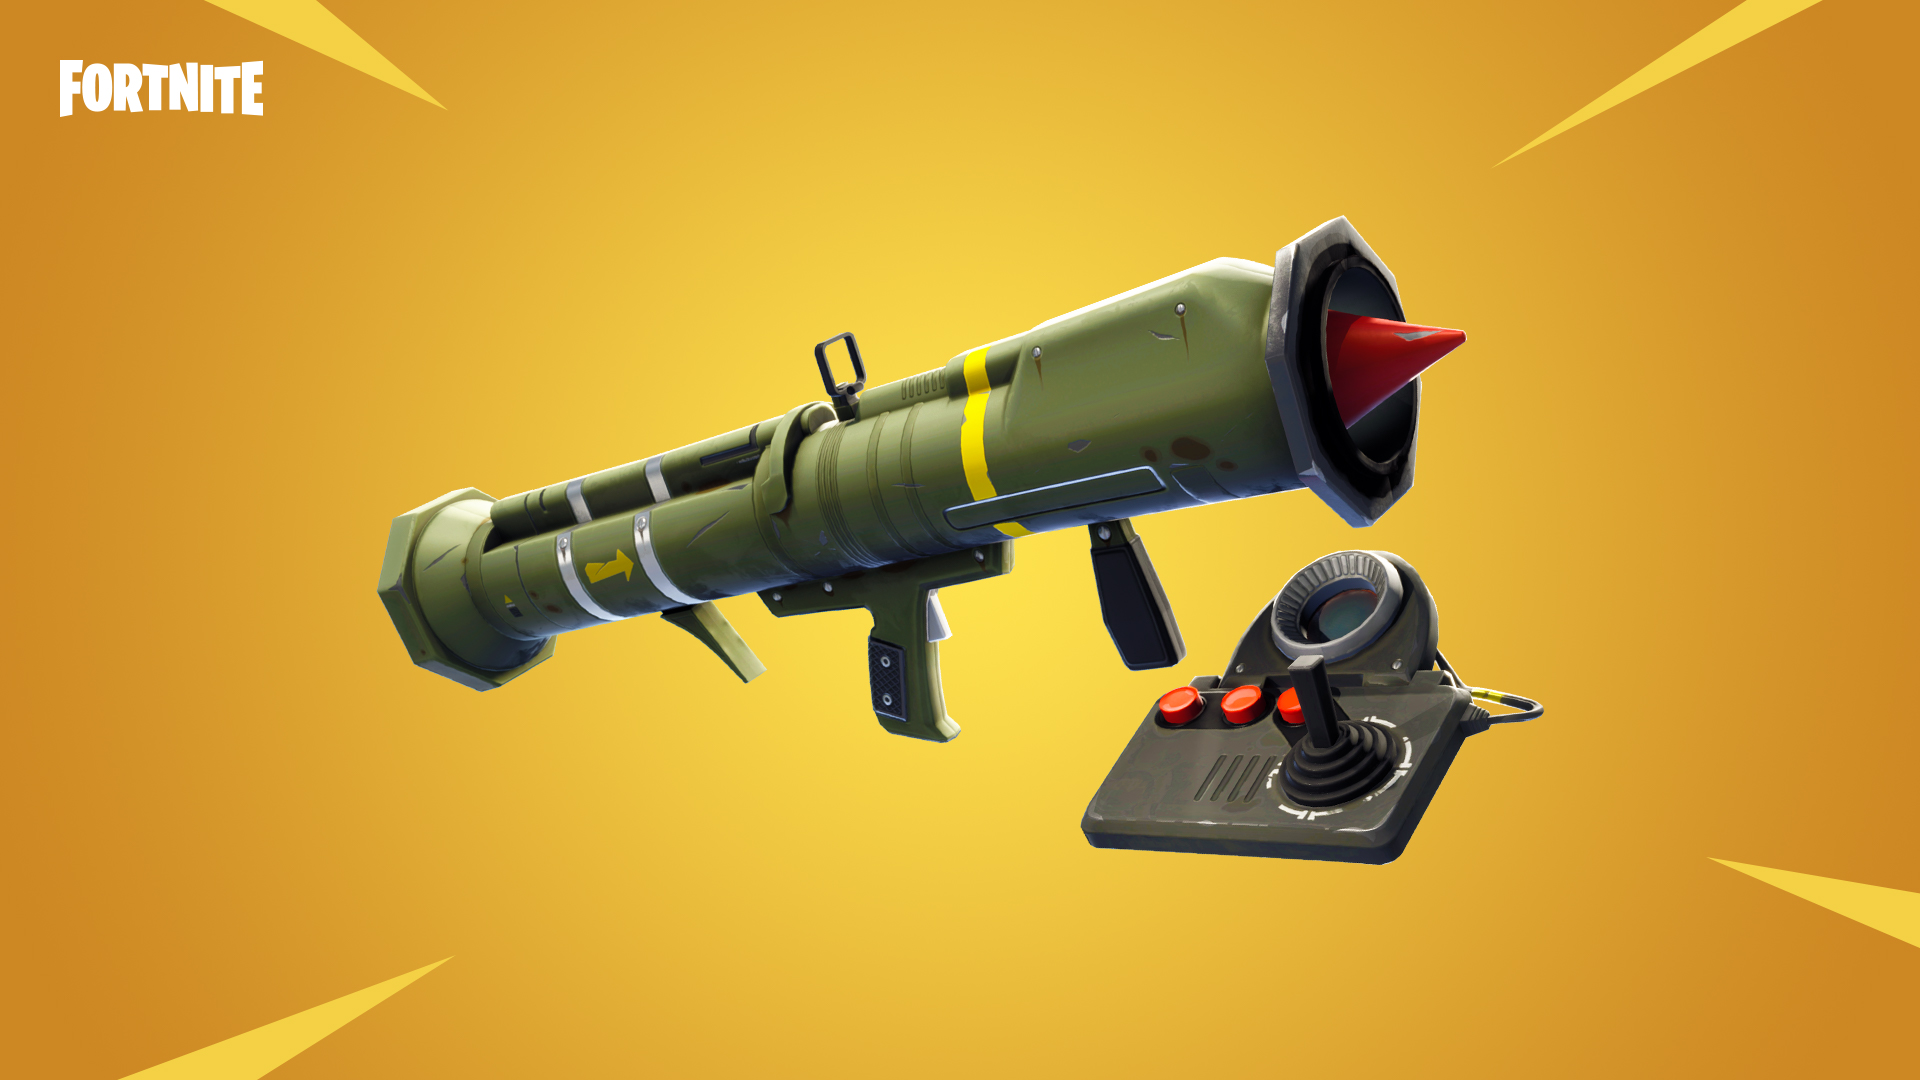 Fortnite Bugs Might Disable Another Weapon Here S How To Avoid It - fortnite bugs might disable another weapon here s how to avoid it